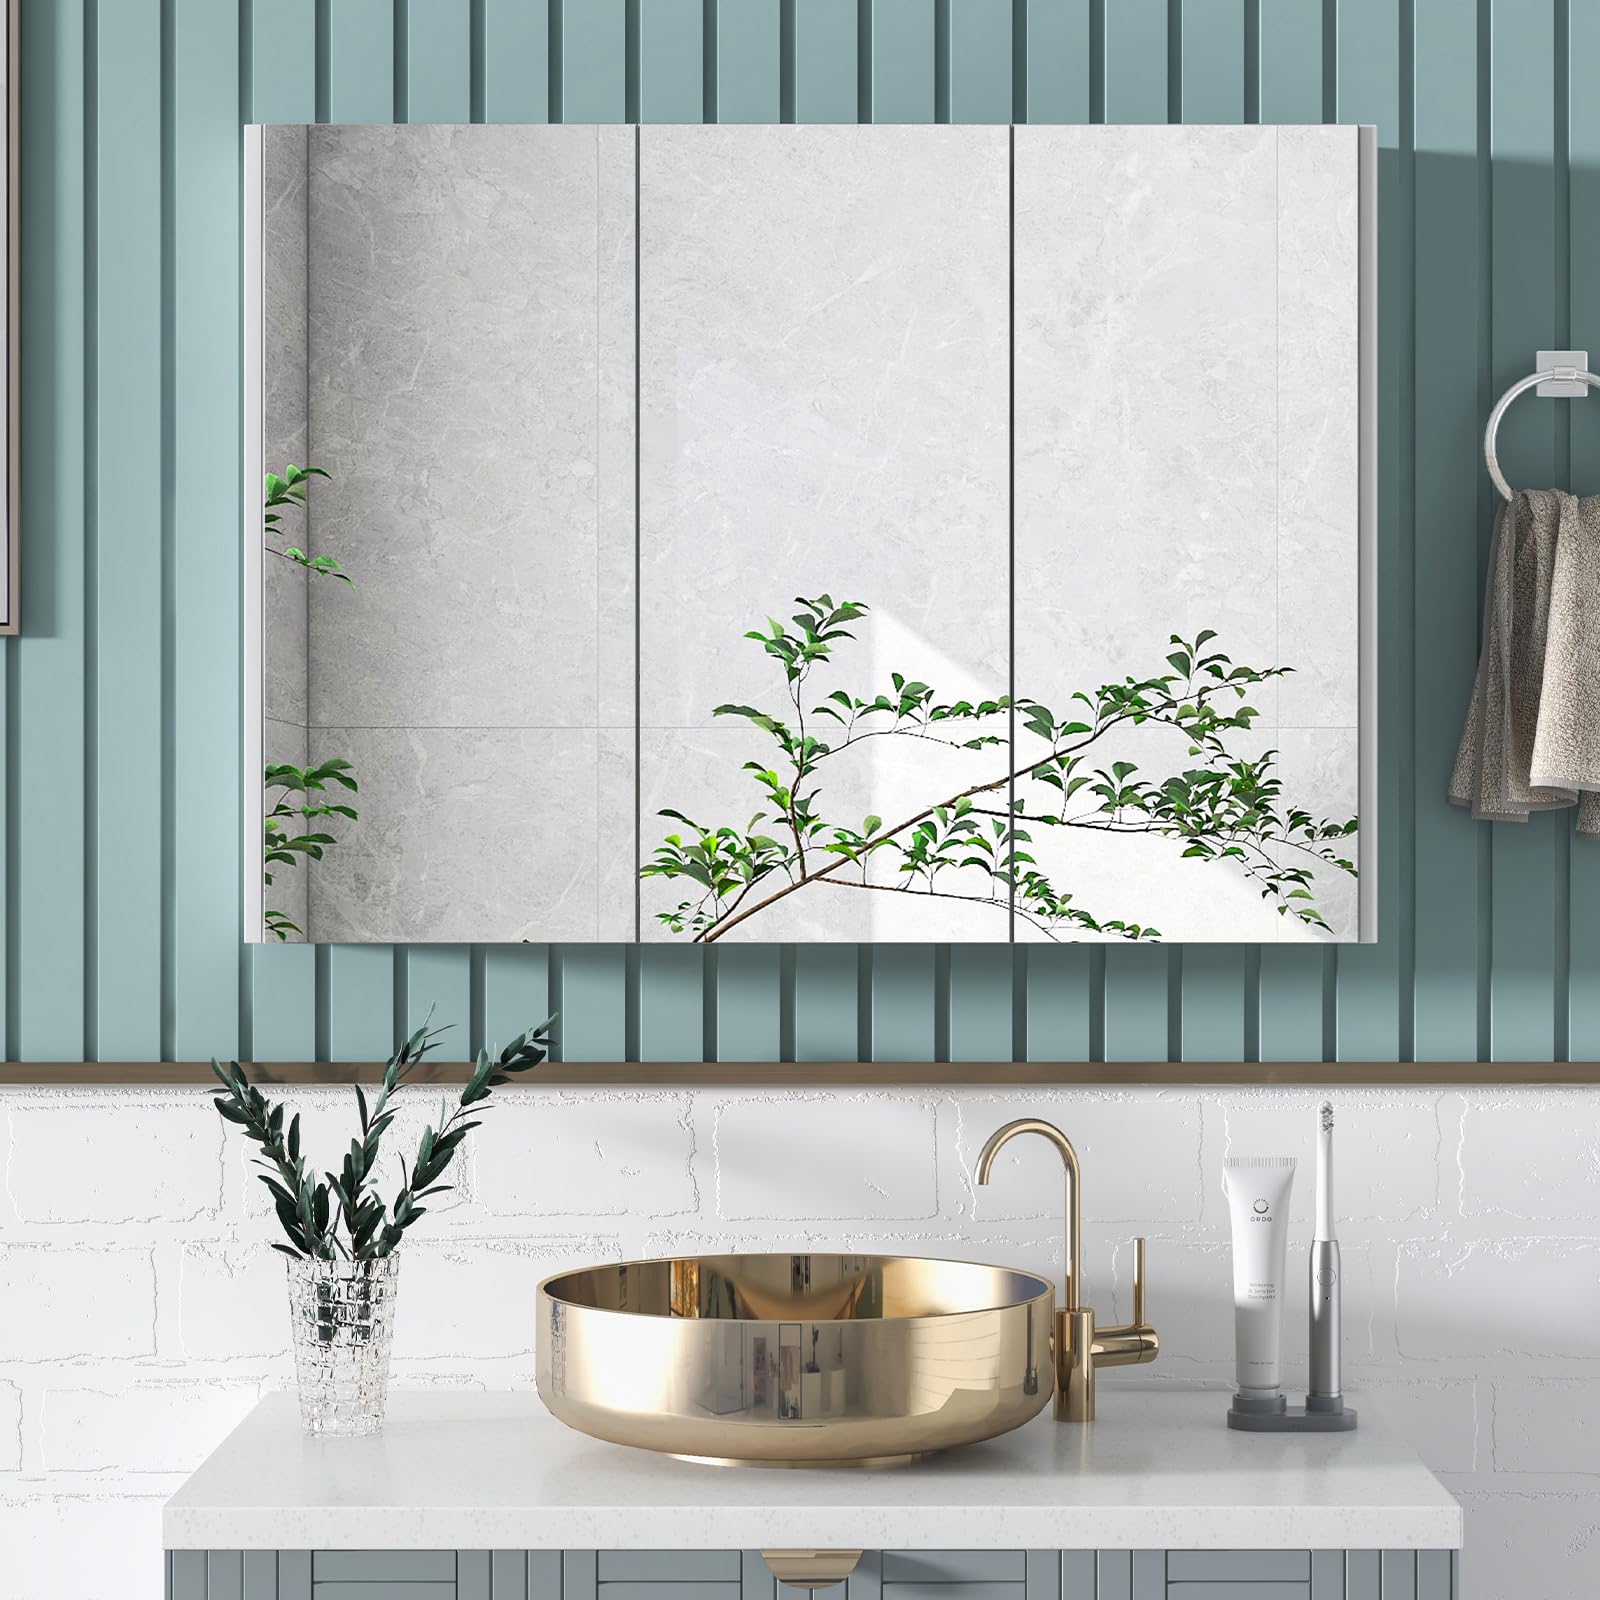 Giantex Bathroom Medicine Cabinet with Mirror - Extra Large Wall Mounted Cabinet with 3 Frameless Mirrored Doors